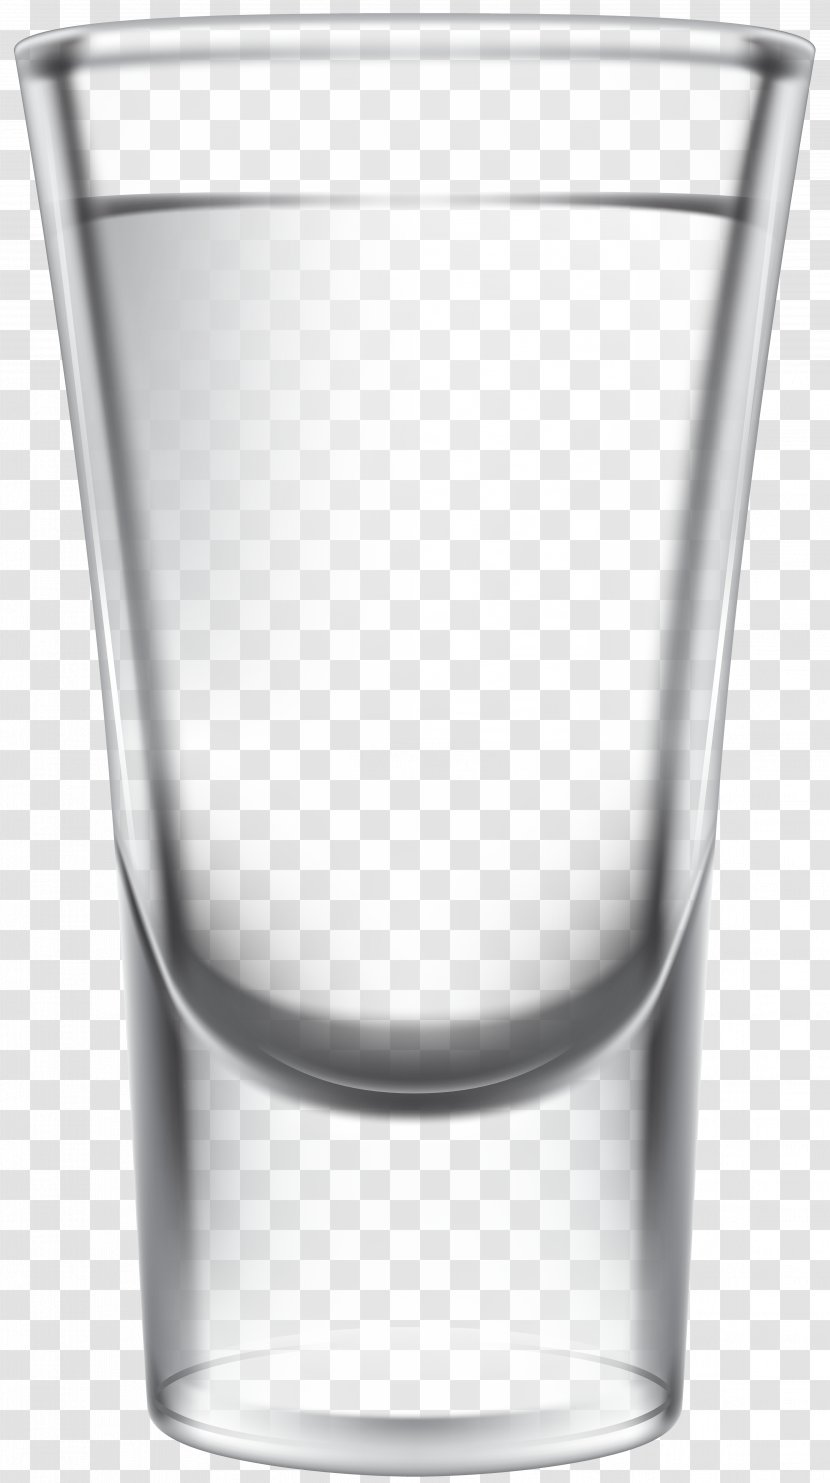 Highball Glass Pint Old Fashioned Cup - Bottle - Tequila Clip Art Image Transparent PNG